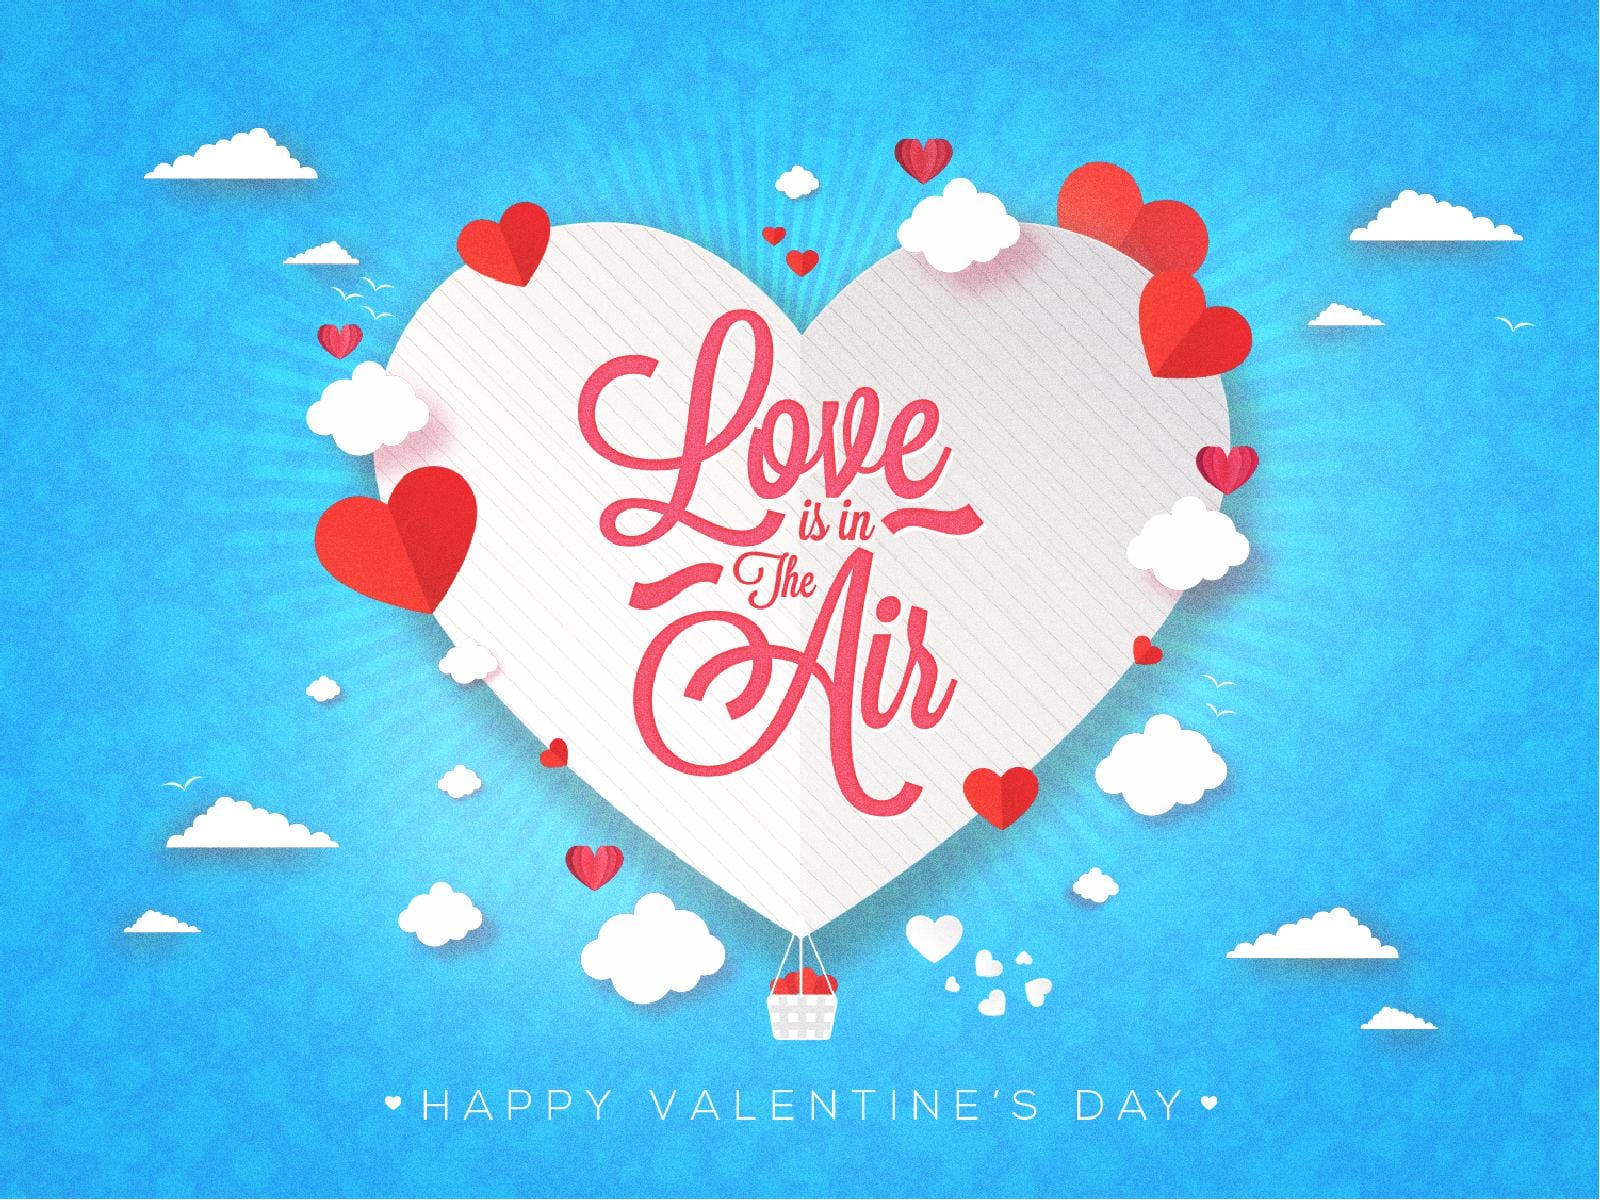 Love is in the Air: Do You Celebrate Valentine's Day? (You Should)